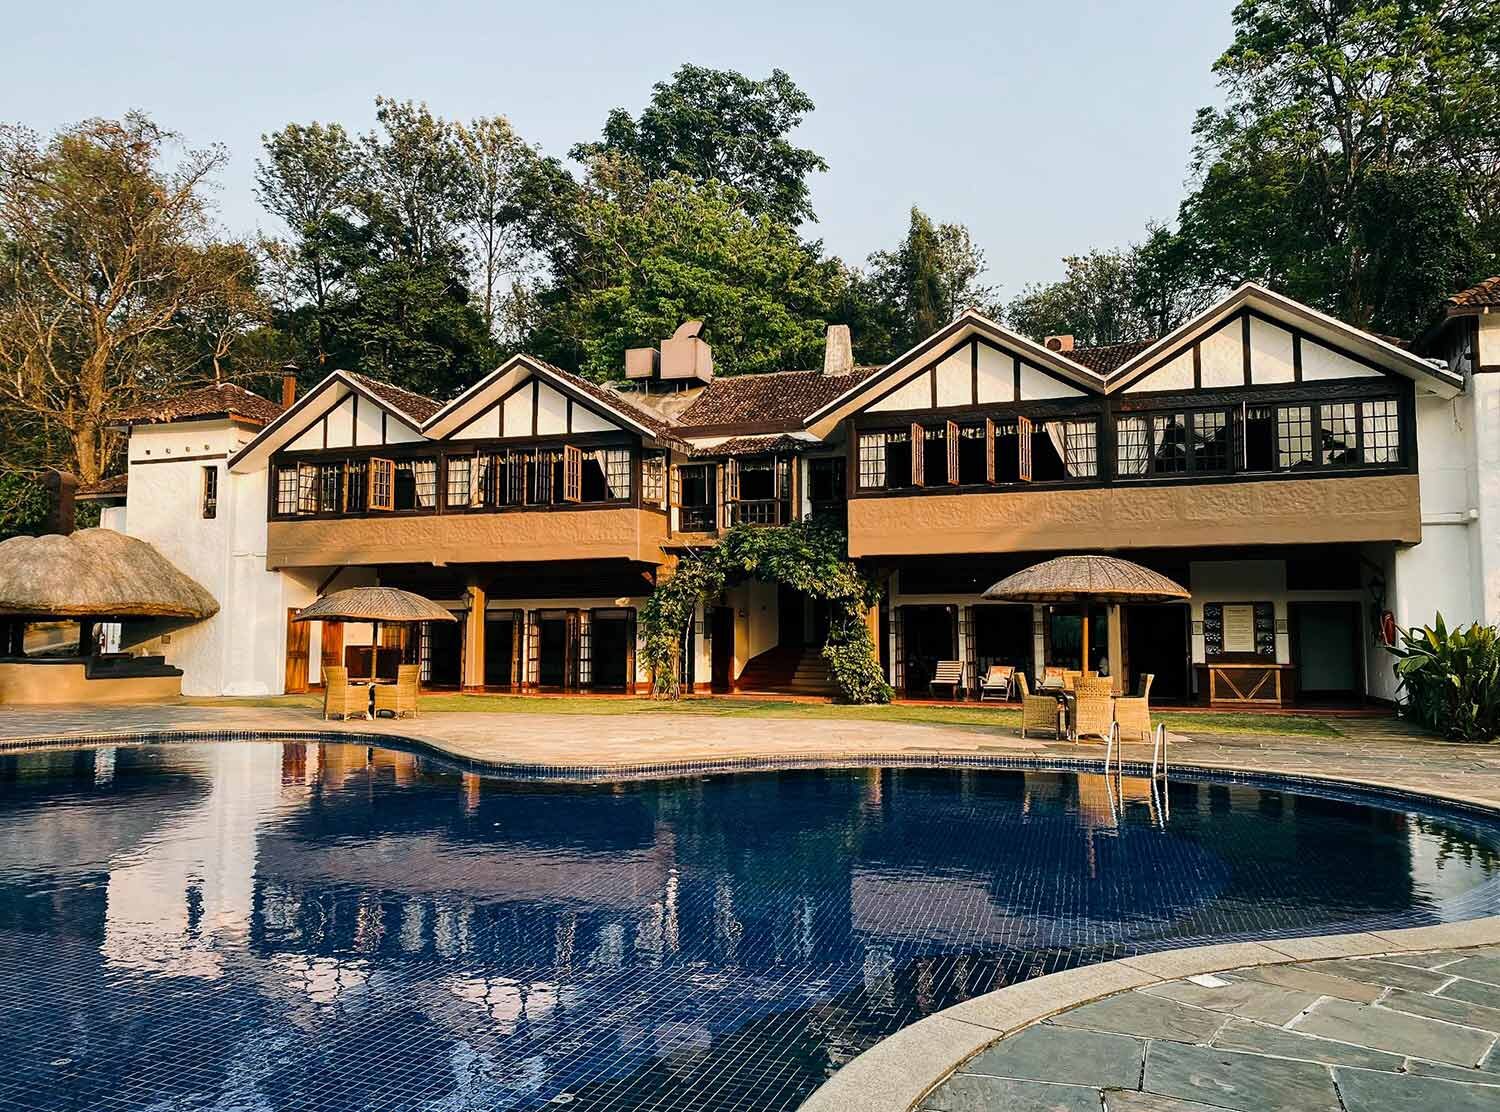 Evolve Back, Coorg Evolve Back, Coorg channeling that charming old-world lodge coziness 